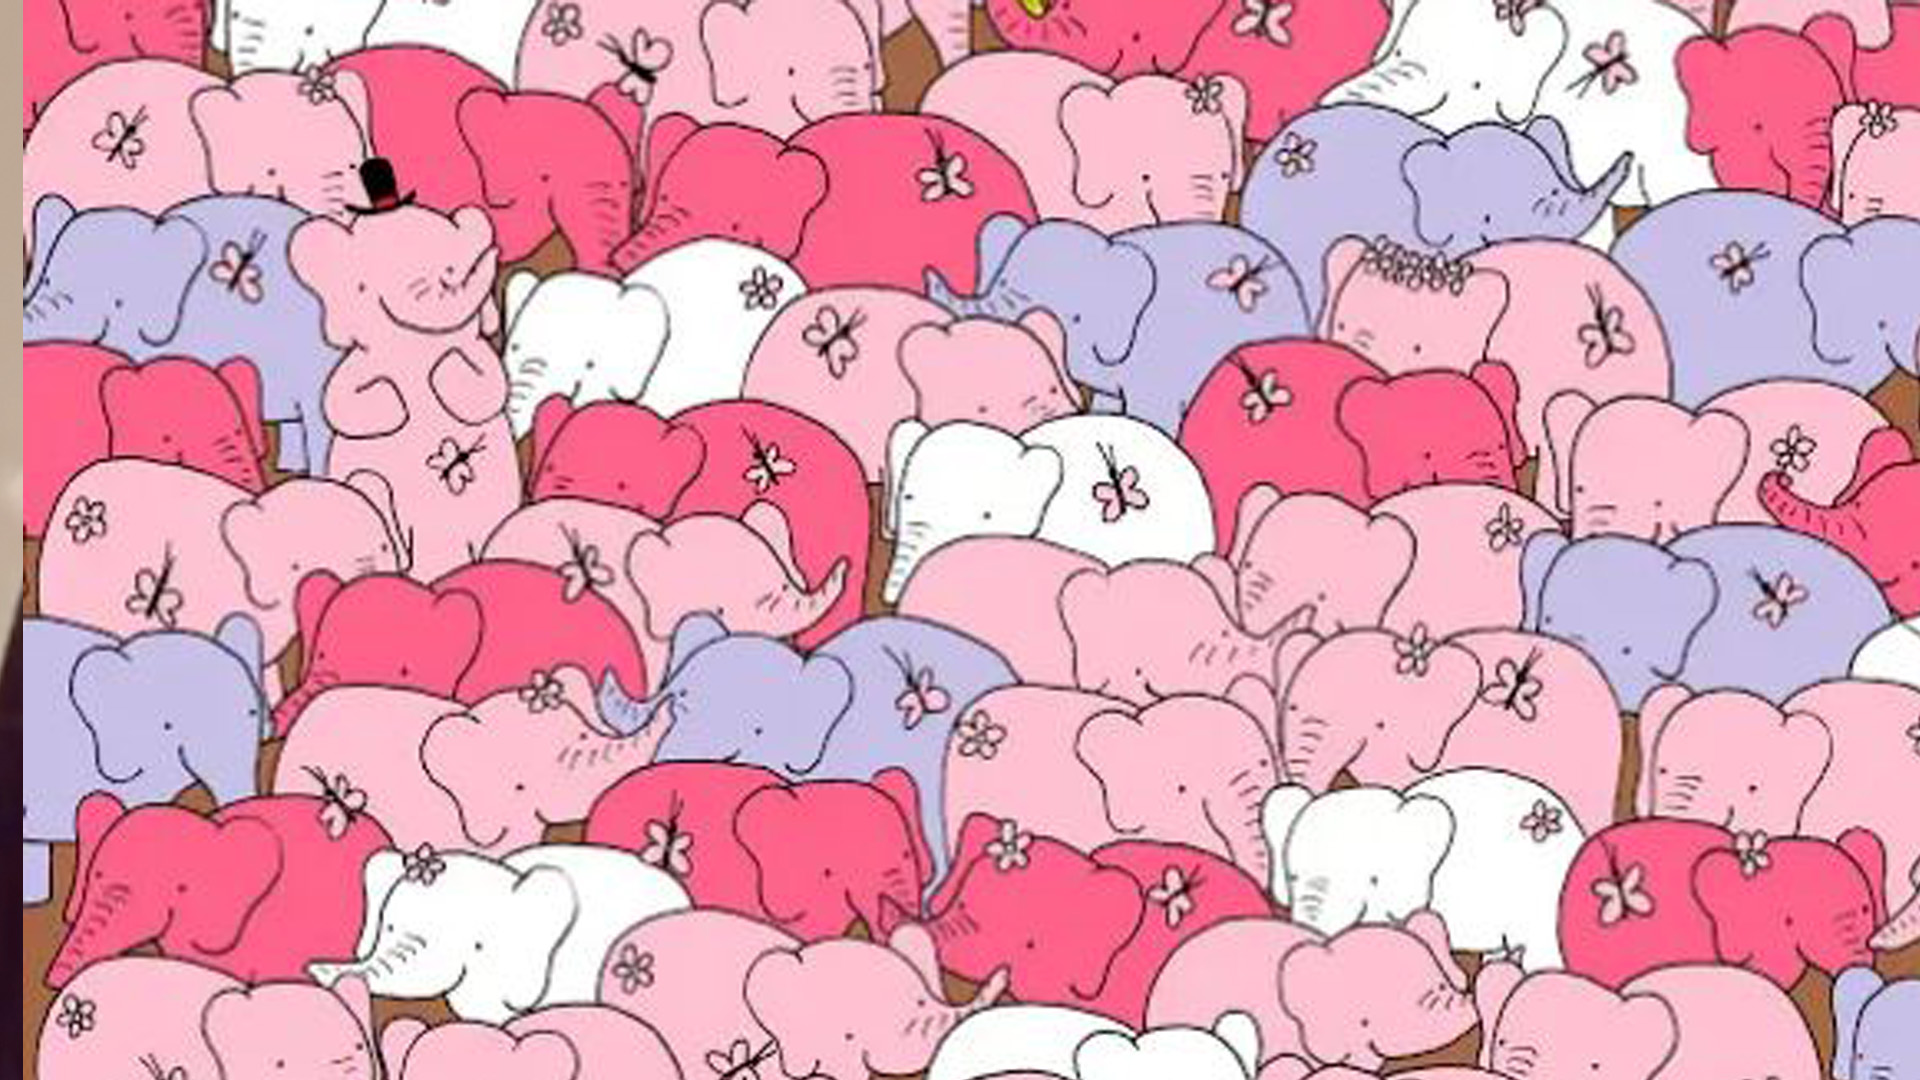 You have 20/20 vision if you can spot the heart hidden among the elephants in under 20 seconds